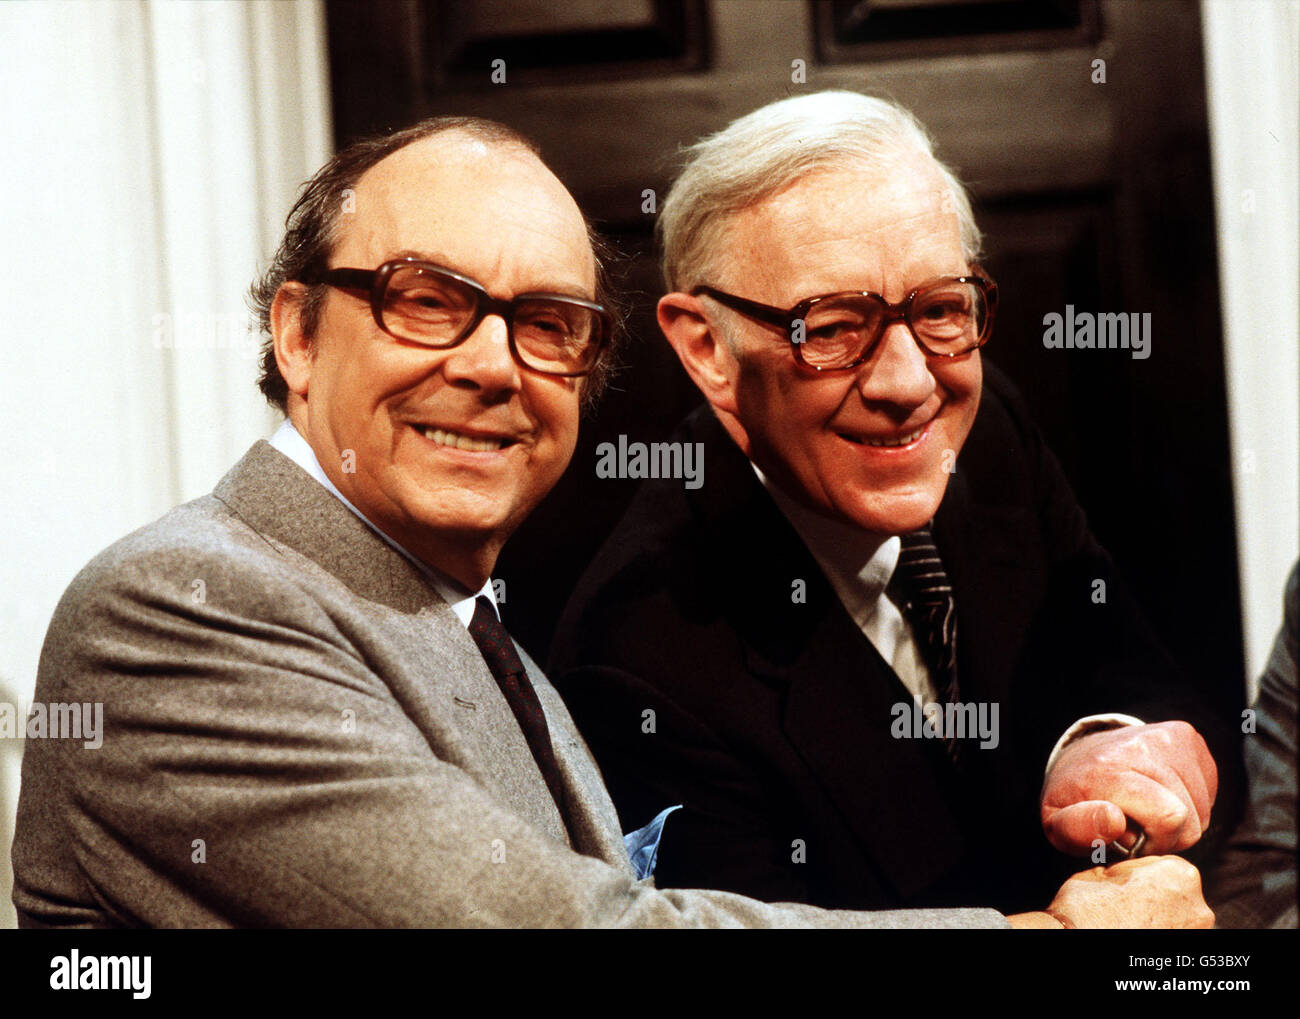 MORECAMBE AND GUINNESS: Comedian Eric Morecambe (left) with actor Sir Alec Guinness. Sir Alec is a guest on the new series of 'The Morecambe and Wise Show'. Stock Photo